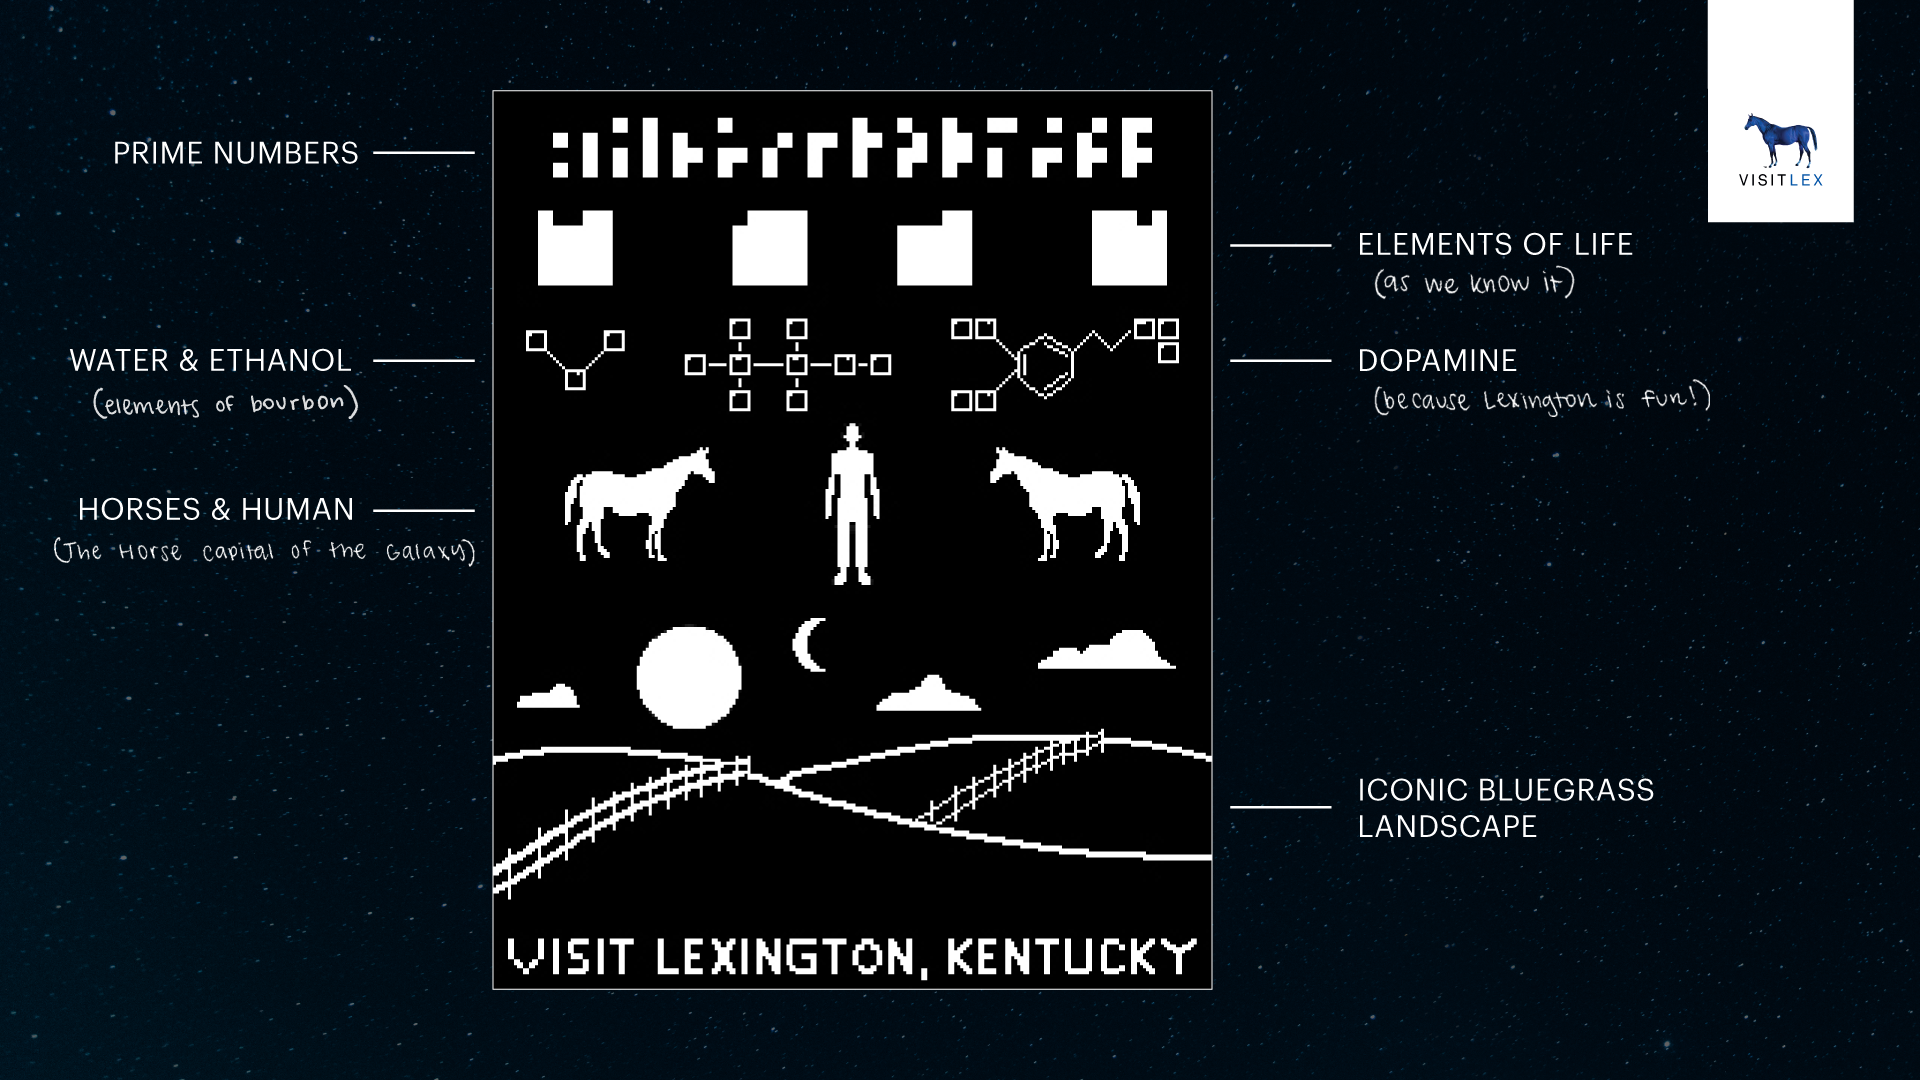 Their infared message incudes information about Lexington, including horses and bourbon